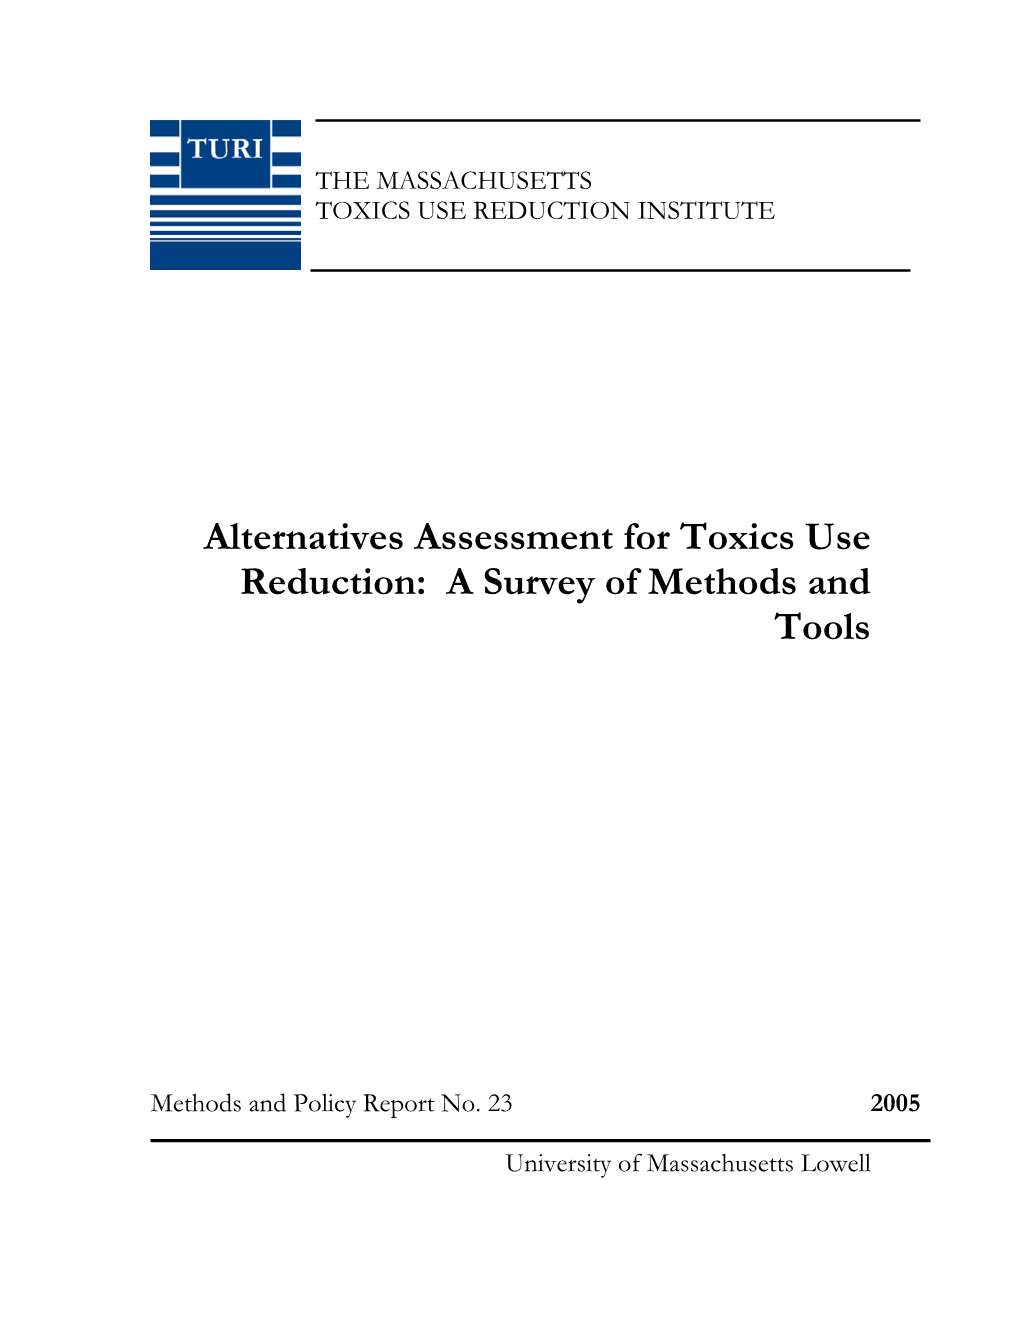 Alternatives Assessment for Toxics Use Reduction: a Survey of Methods and Tools